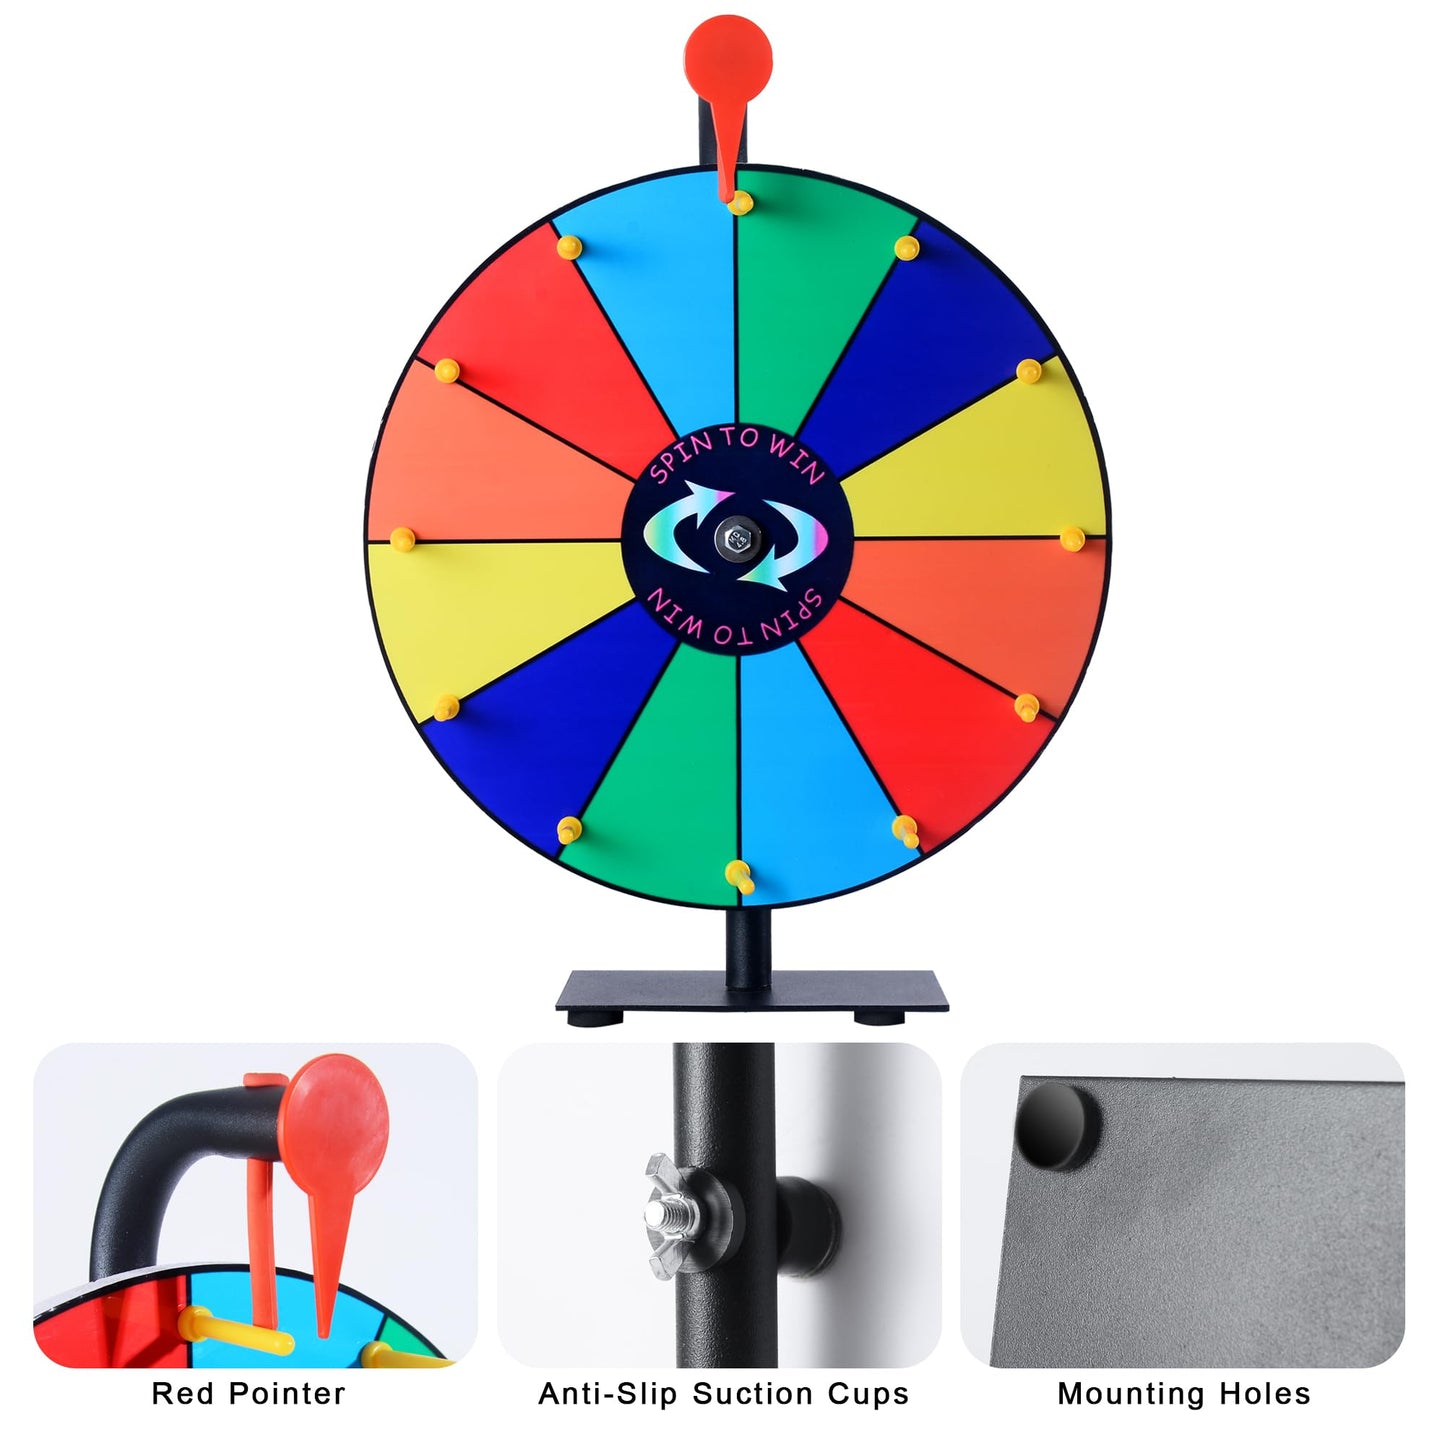 LRMBKM 12 Slots Prize Wheel,12 Inch Prize Wheel Spinner with Stand and Heavy Duty Base,Spinning Wheel for Prizes,Spin The Wheel for Fortune Spinning Game Carnival & Engaging Home Parties,Tradeshow.